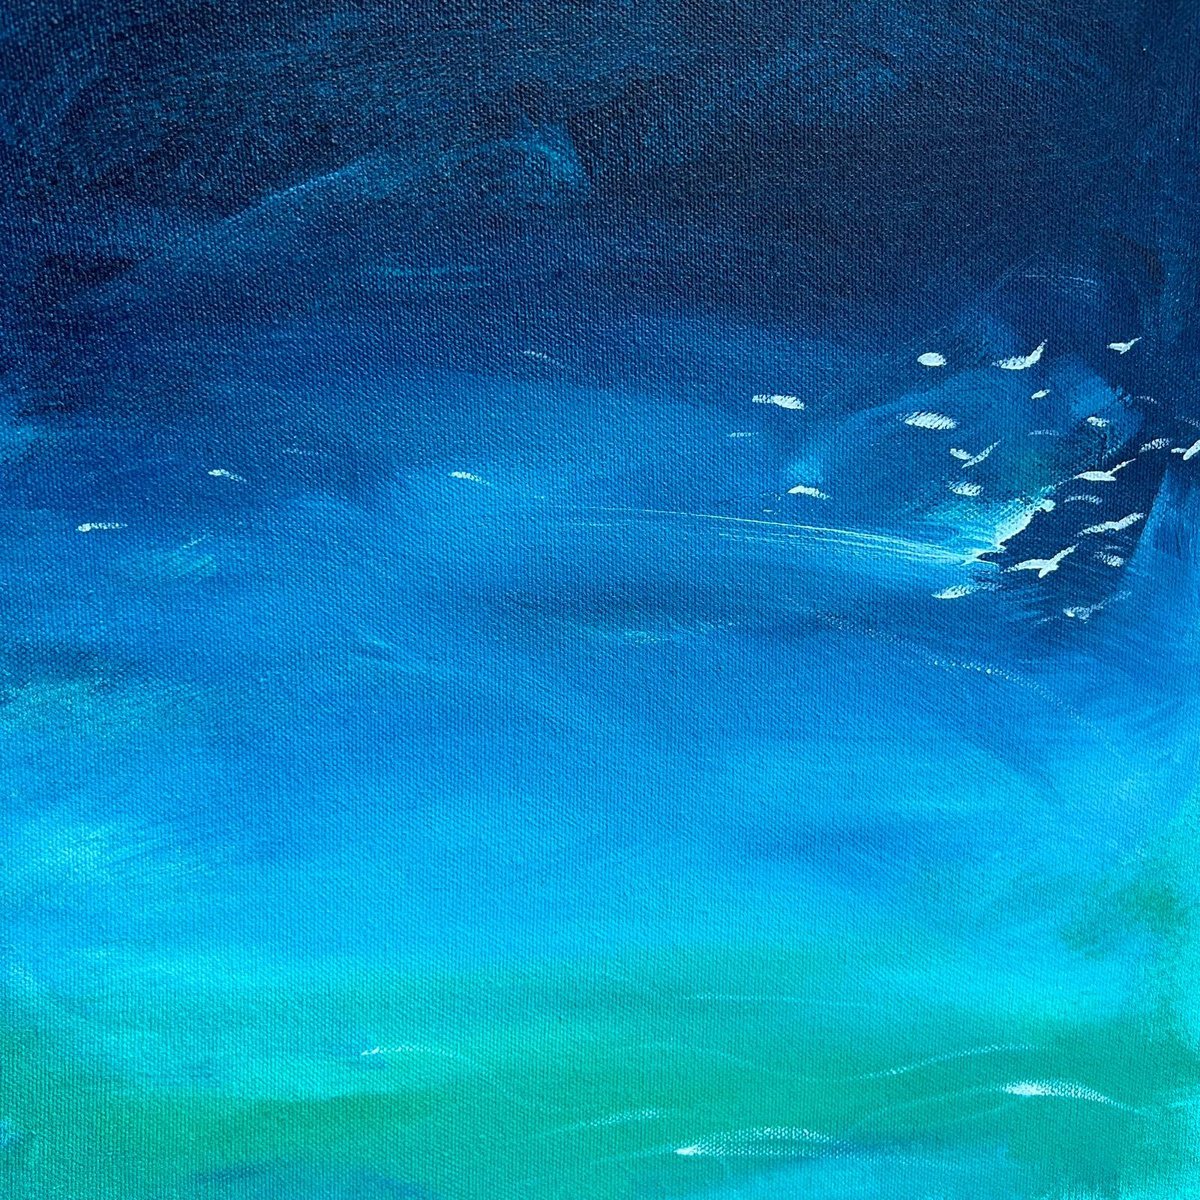 Abstract Seascape With Birds by Shabs Beigh